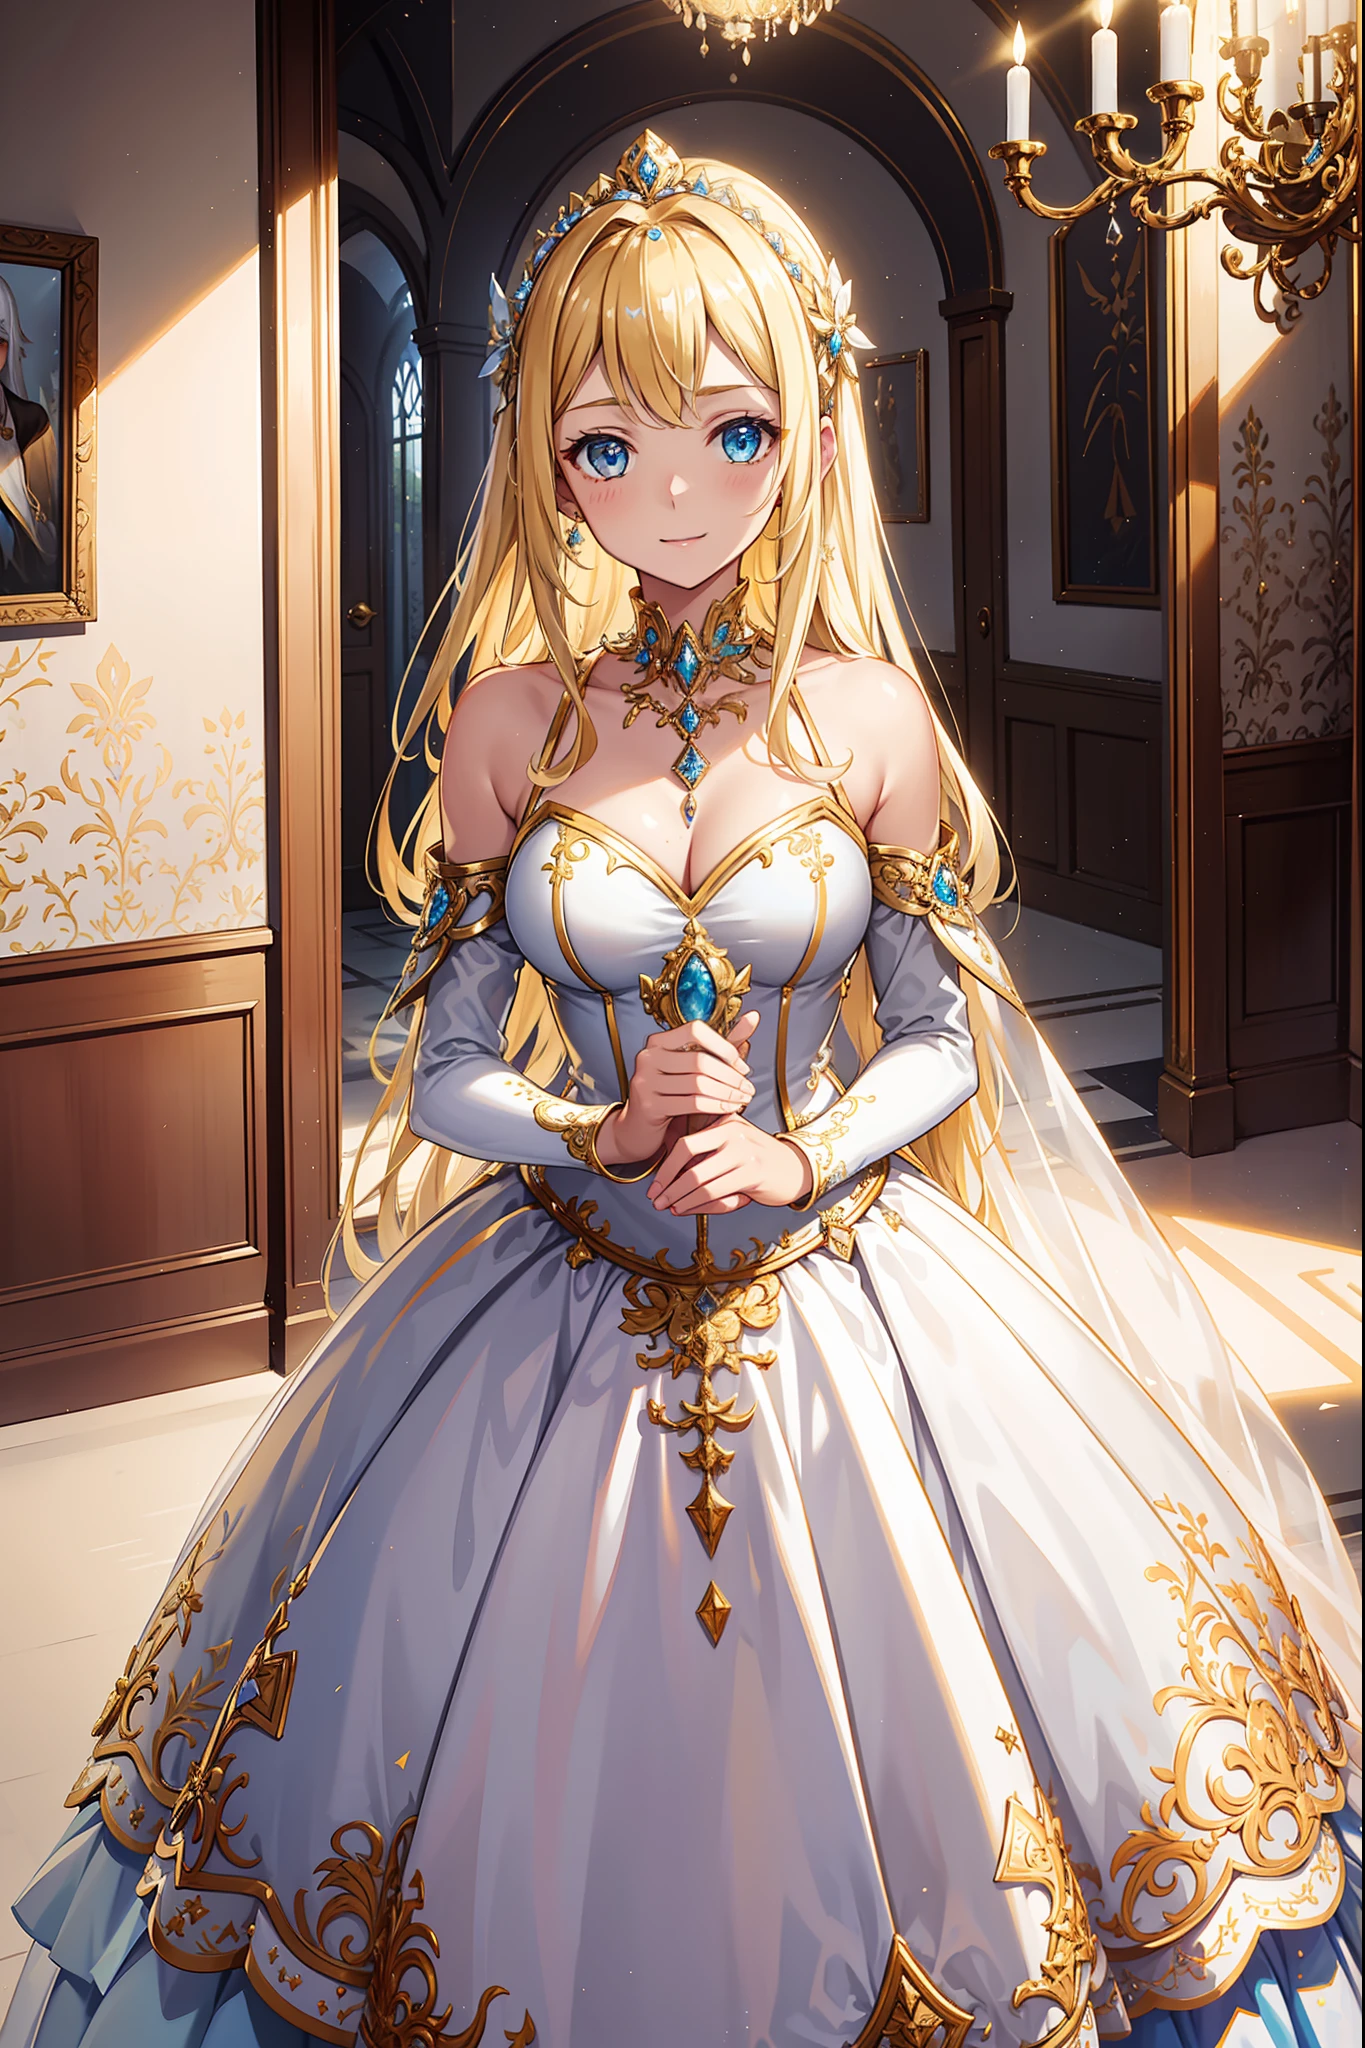 teens girl，divino，Enchanted，Enchanted，blond hairbl，having fun，Being in love，White and yellow princess dress，Silver crown，intricate detailed clothes，(Diamond decoration)，Royal motif，swim wears，inside in room，(Shine:1.2), (Best quality), (Masterpiece:1.2)，Beautiful detailed face